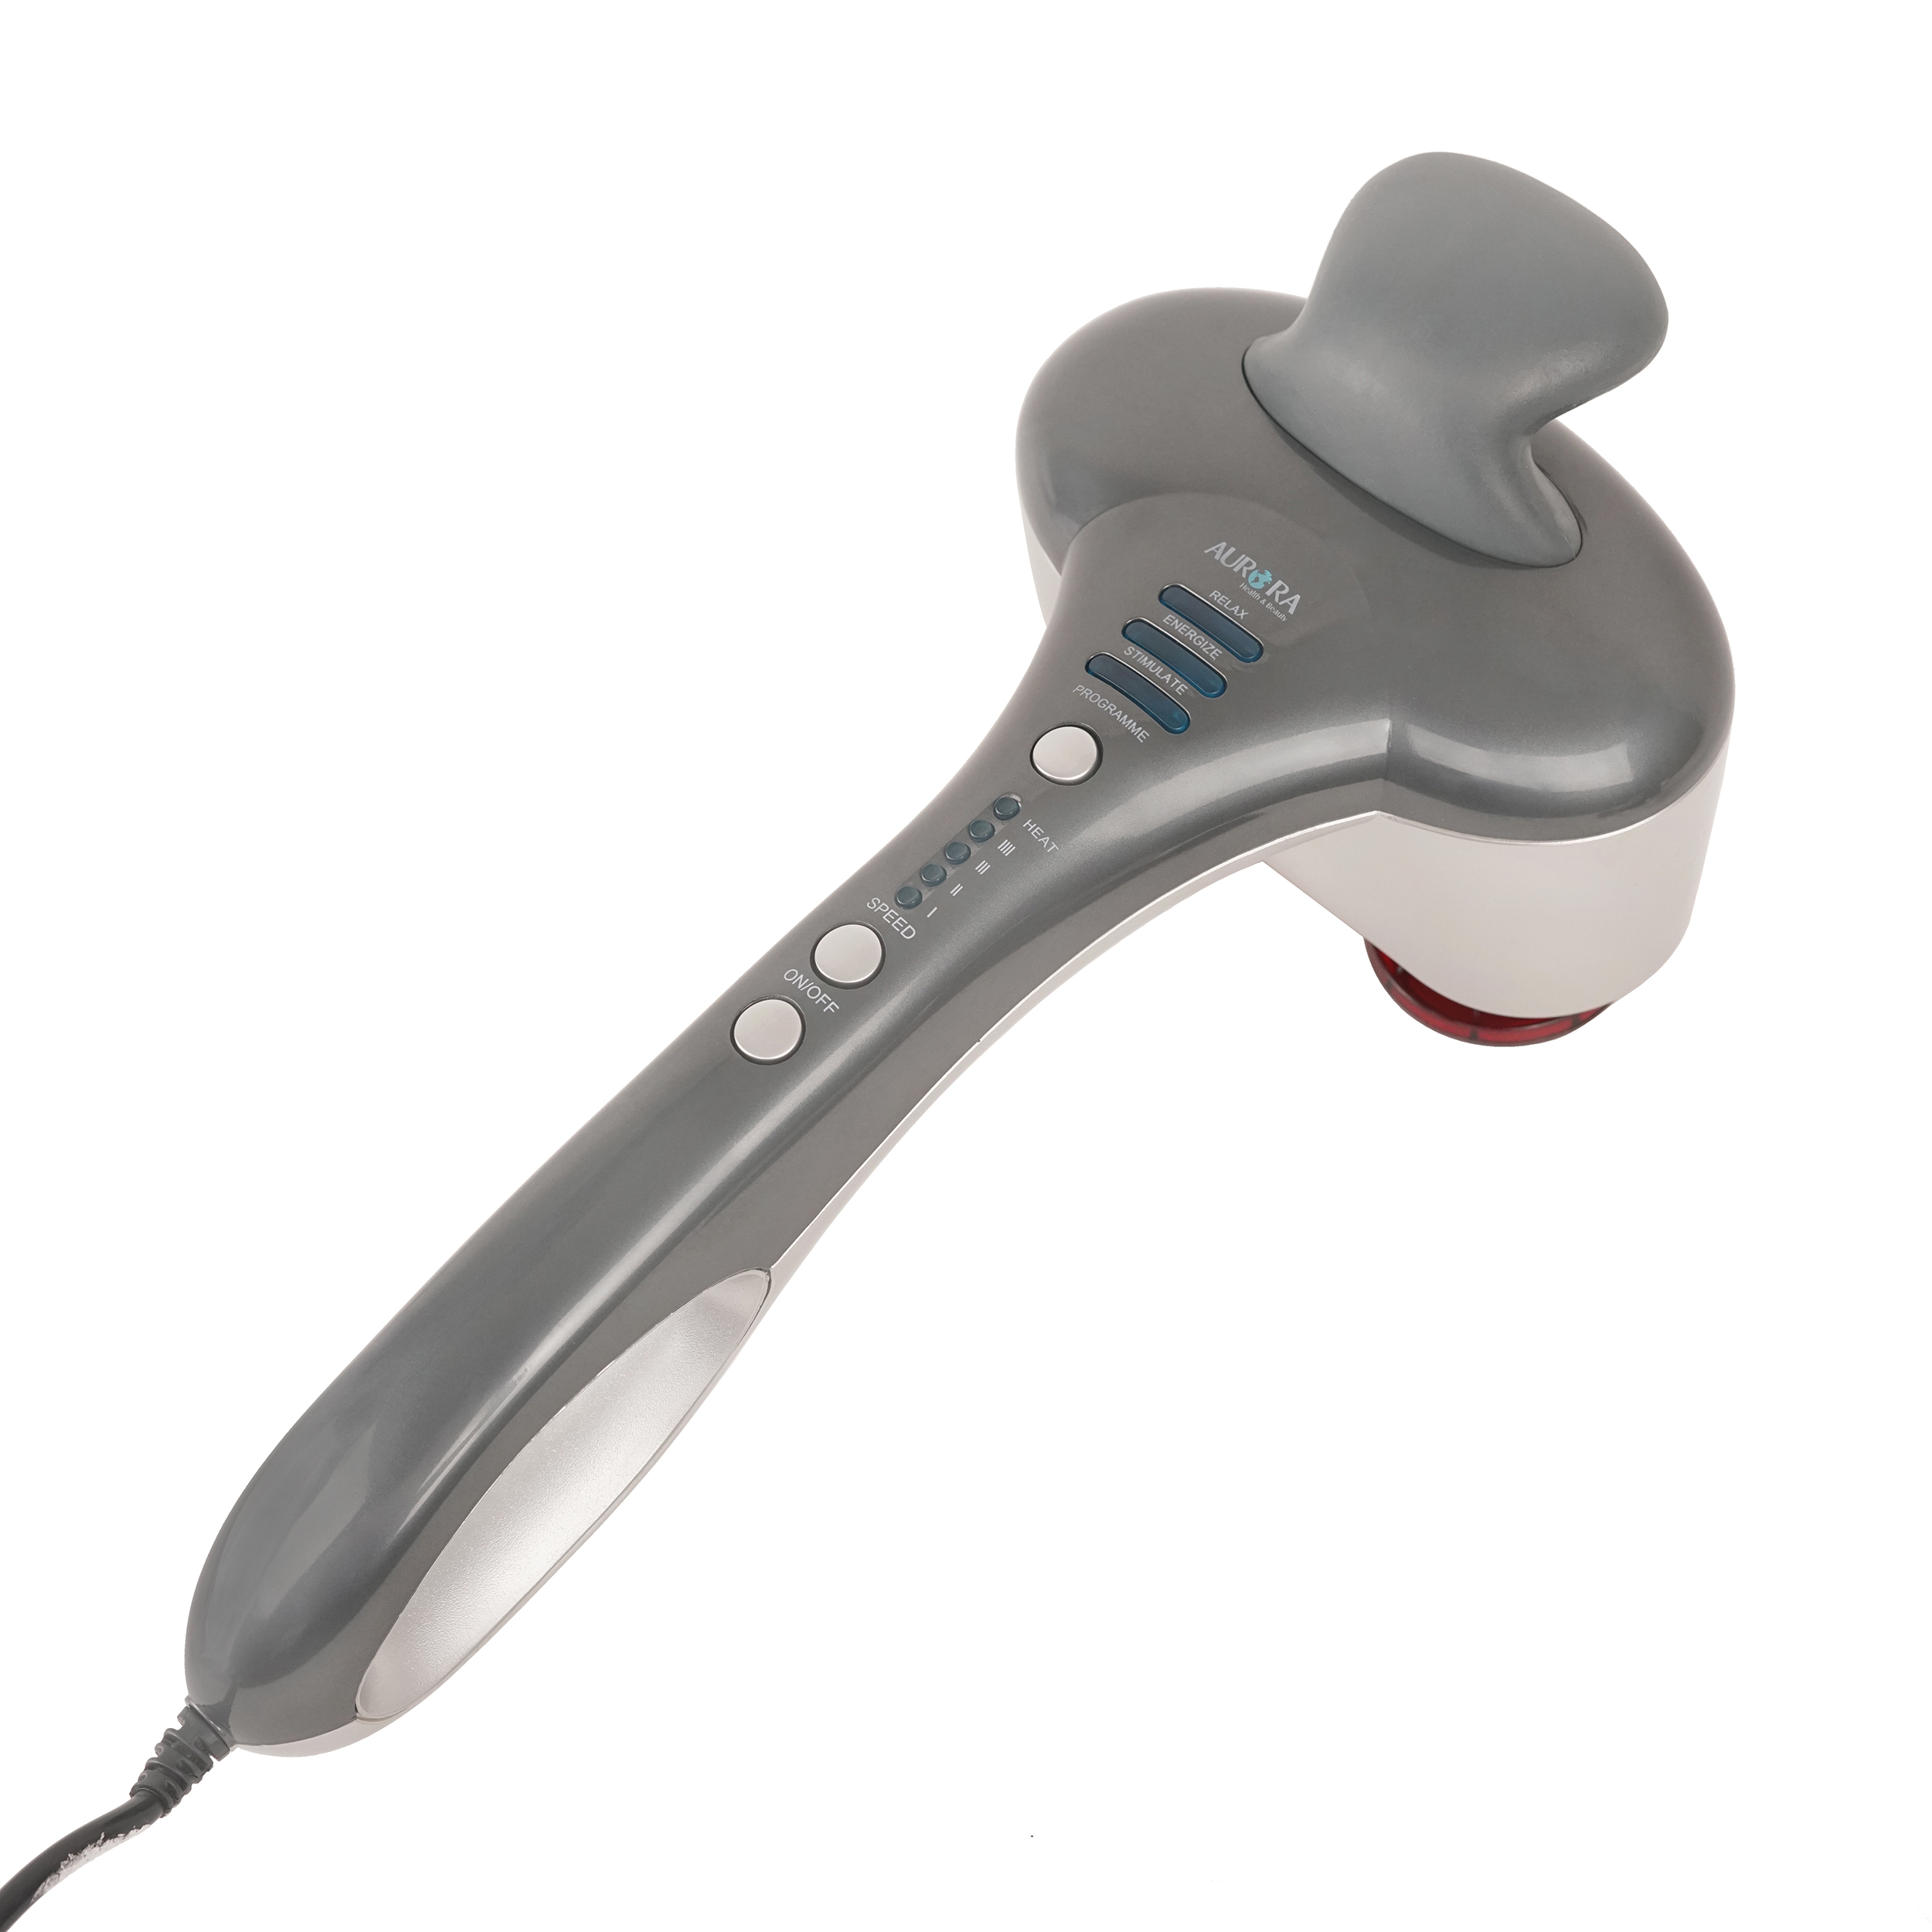 Brookstone MAX Massager Red Dual Node 5 Speed 3 Program Percussion